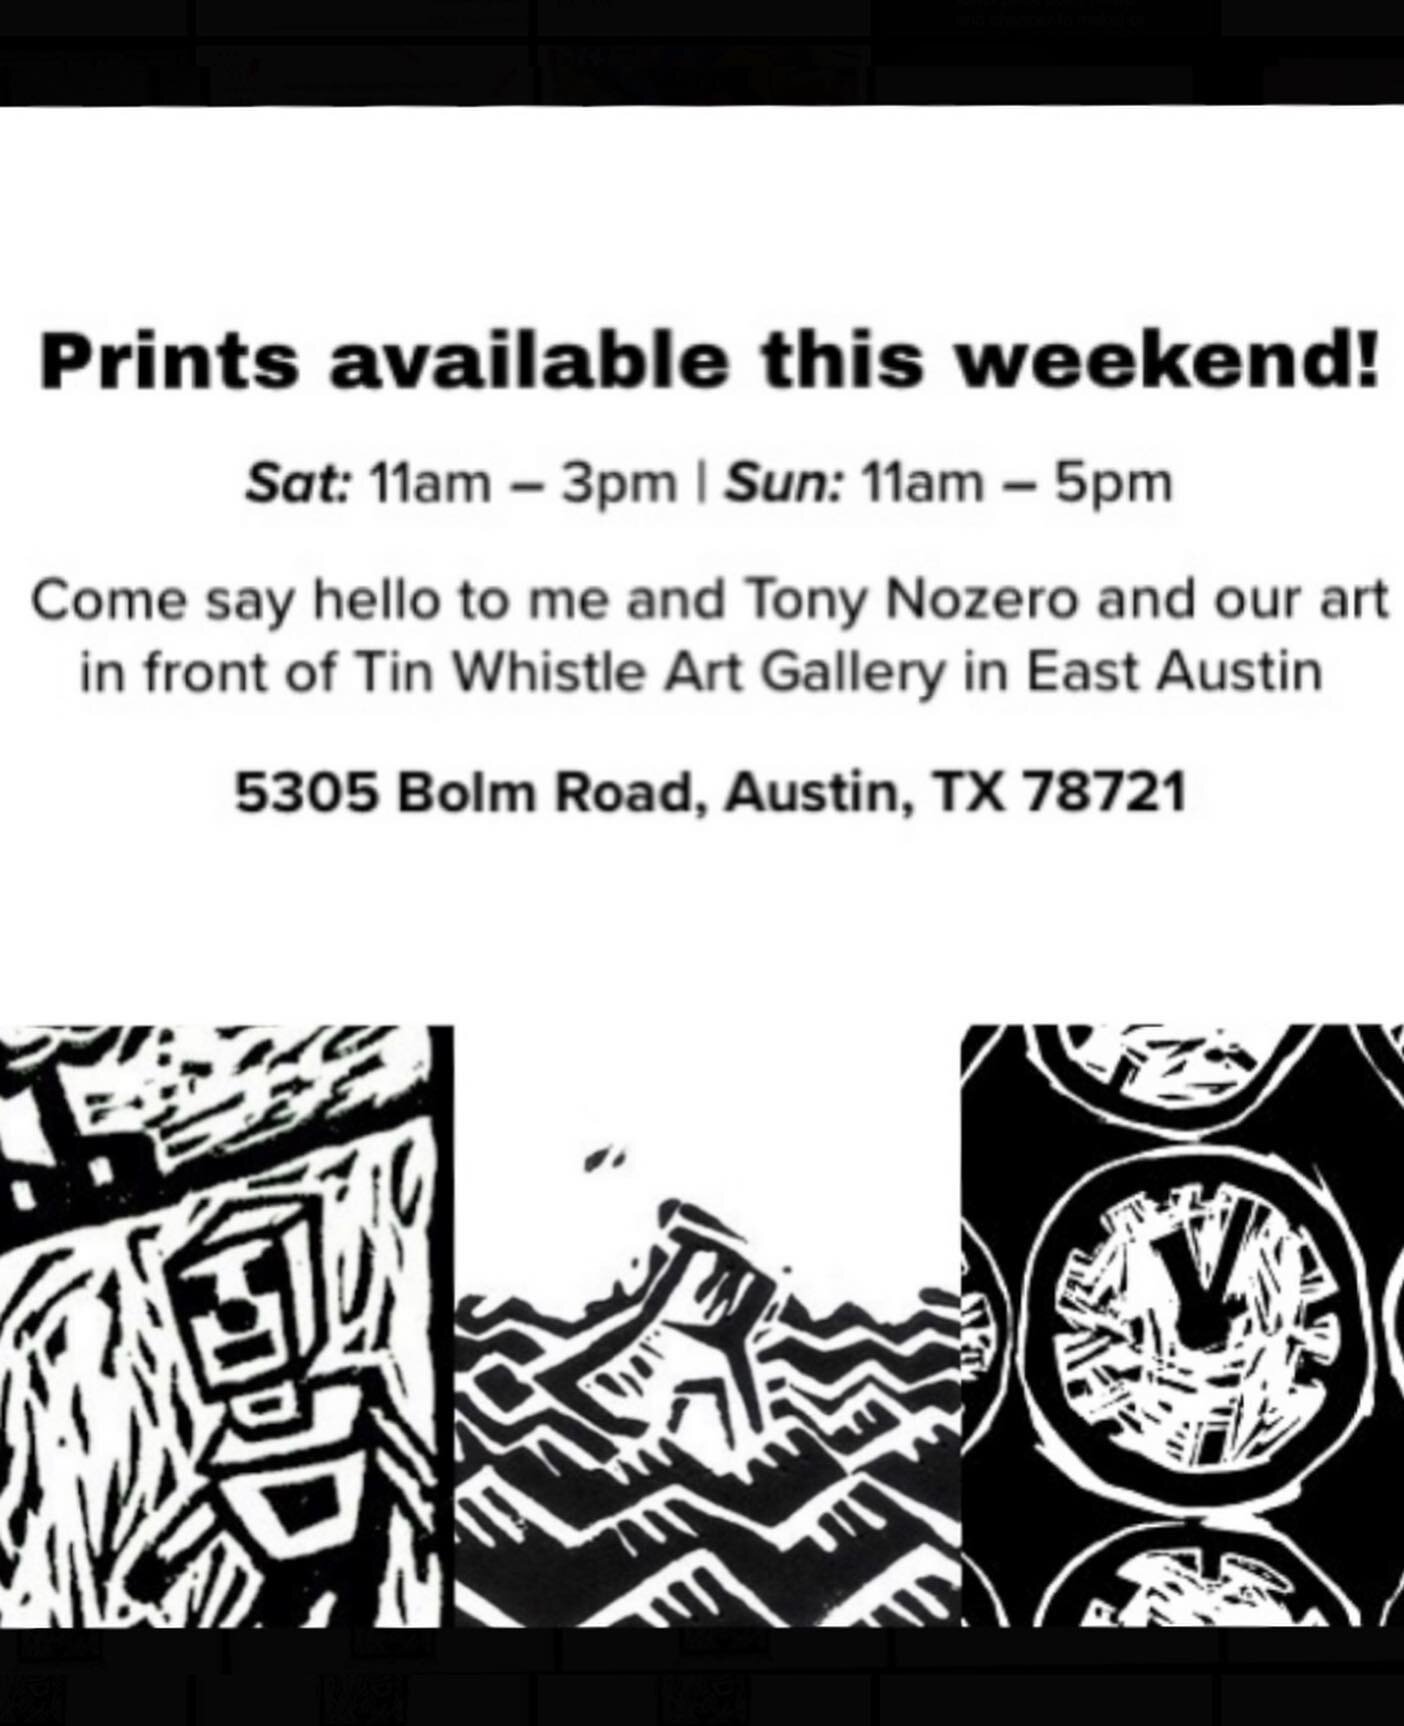 November 11th and 12th! If you&rsquo;re out looking at art this weekend in East Austin, stop by and visit me in front of @tinwhistleartgallery at 5305 Bolm Rd. I&rsquo;ll be there Saturday 11-3 and Sunday 11-5. 

Thanks to @tony.nozero for inviting m